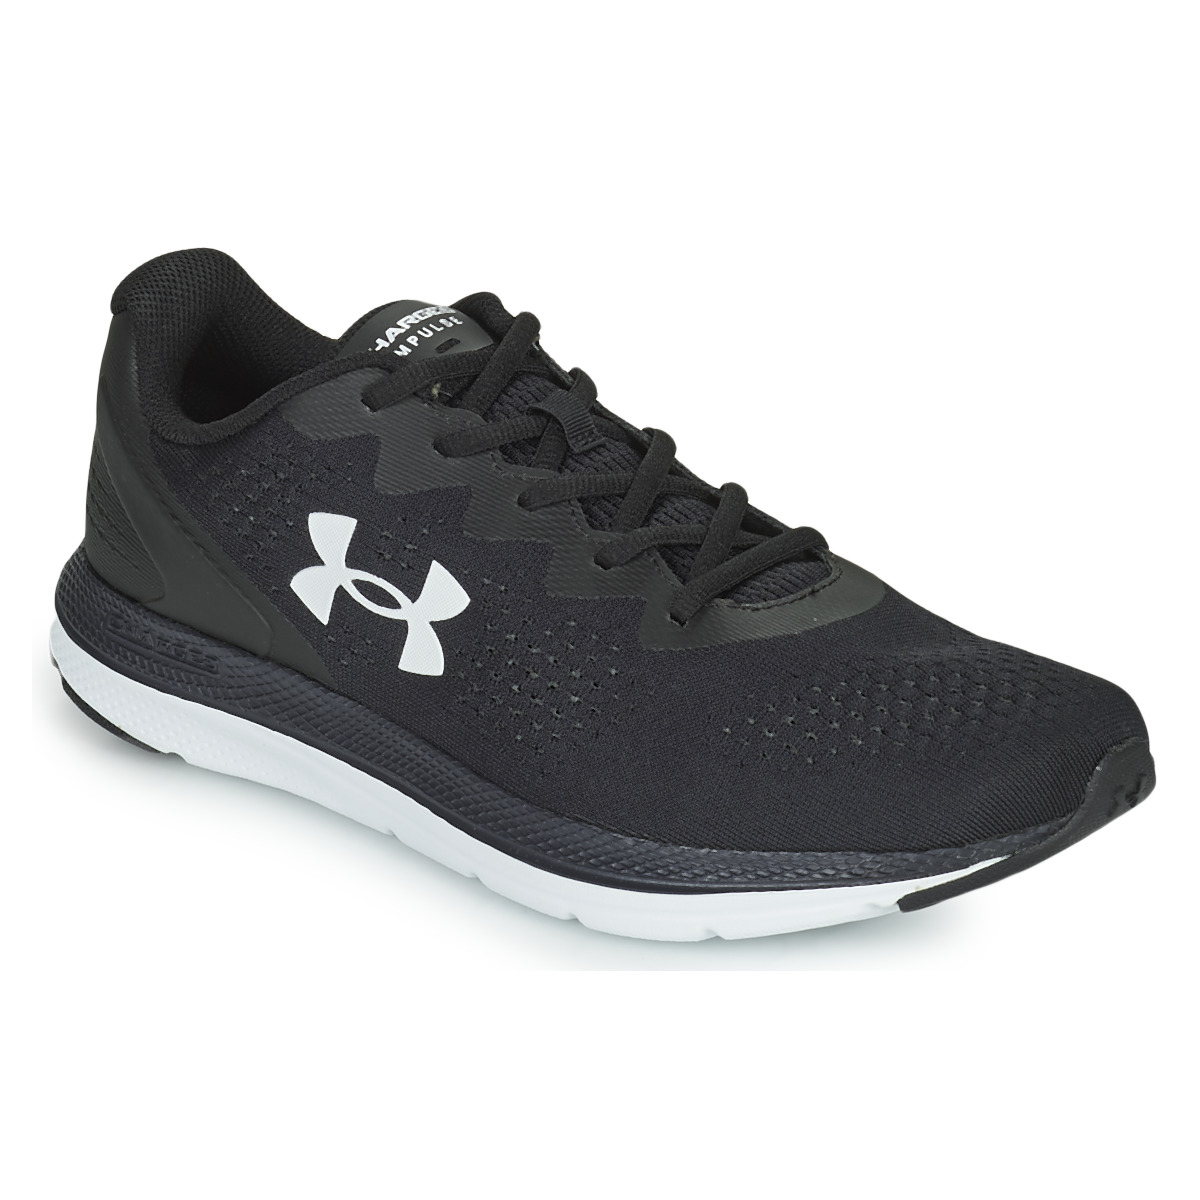 Chaussures Homme Multisport Under Armour CHARGED IMPULSE 2 Noir / Blanc